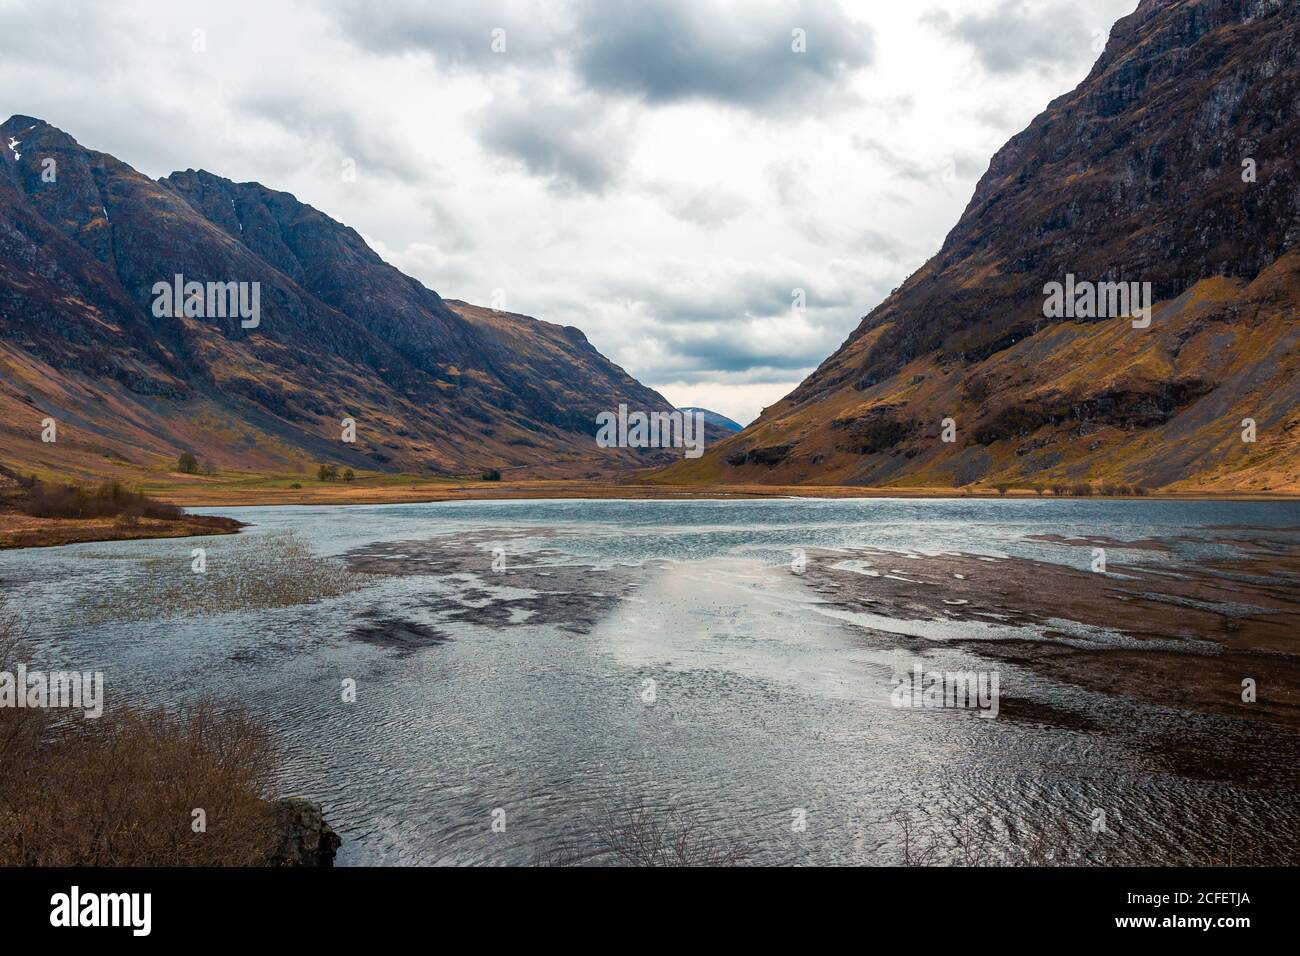 Amazing Scottish landscape of calm lake with mirrored surface reflecting mountain with snow covered peak and blue cloudy sky in Glen Coe area Stock Photo